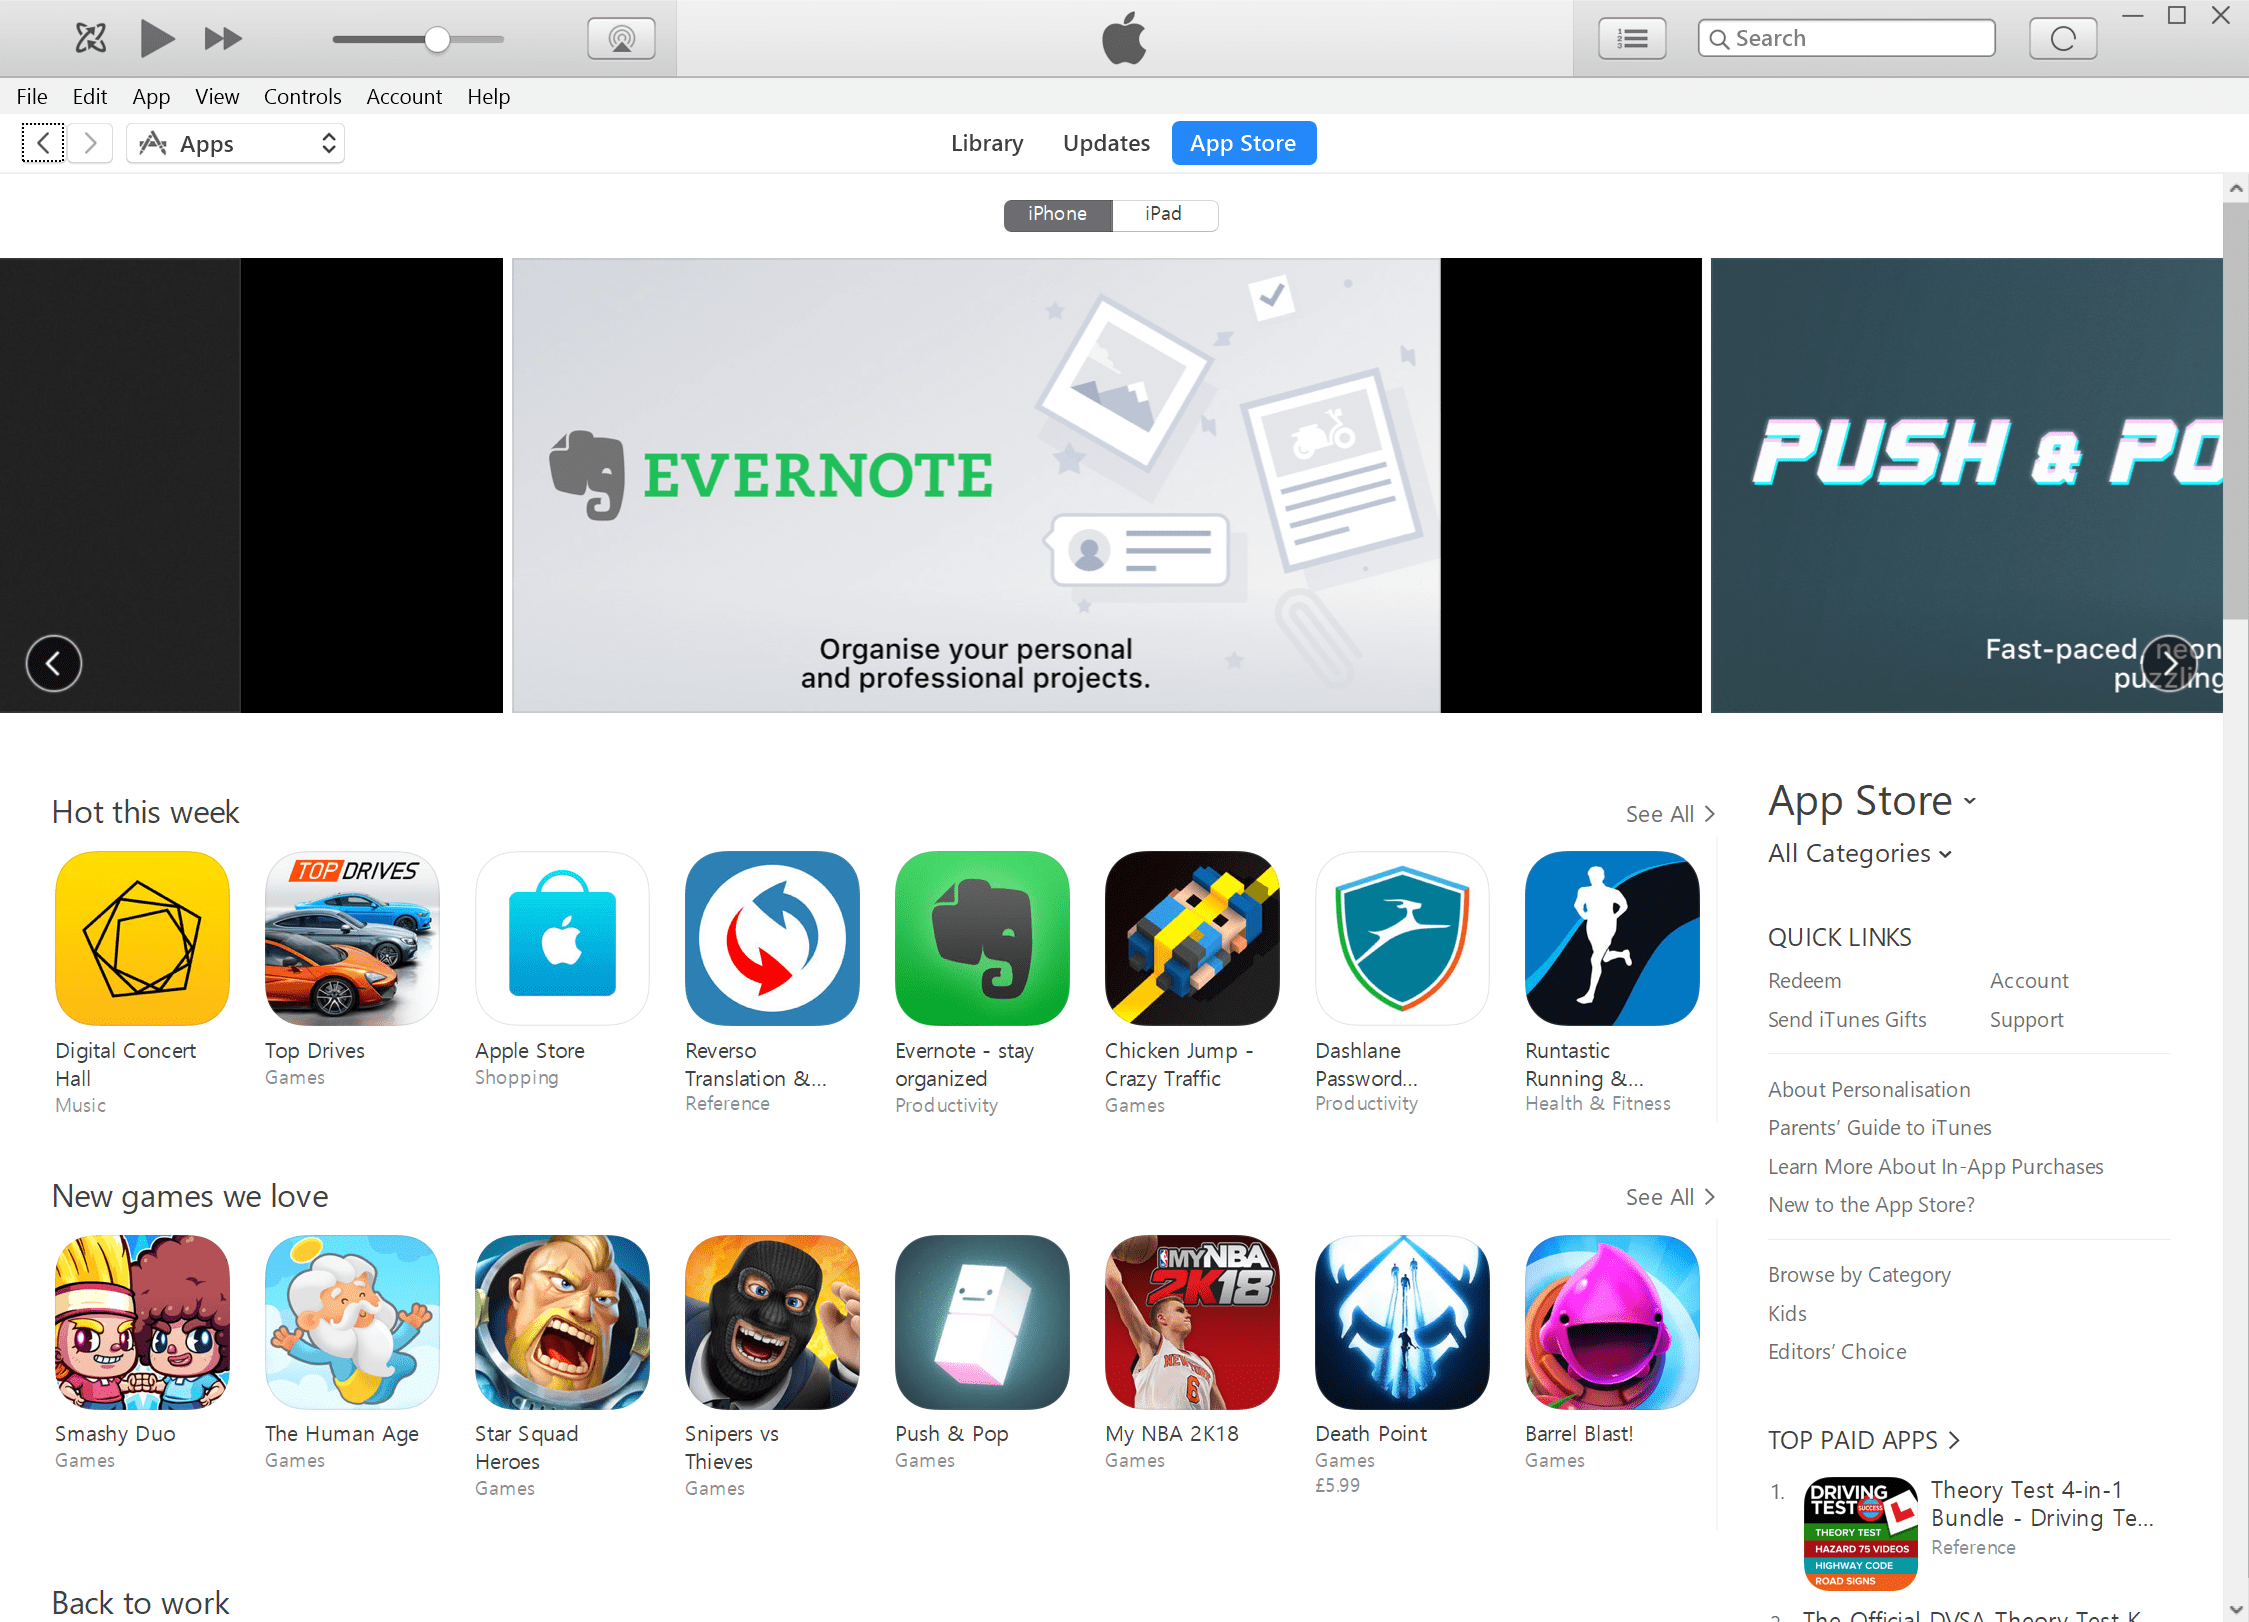 You can no longer browse the App Store inside iTunes ...
